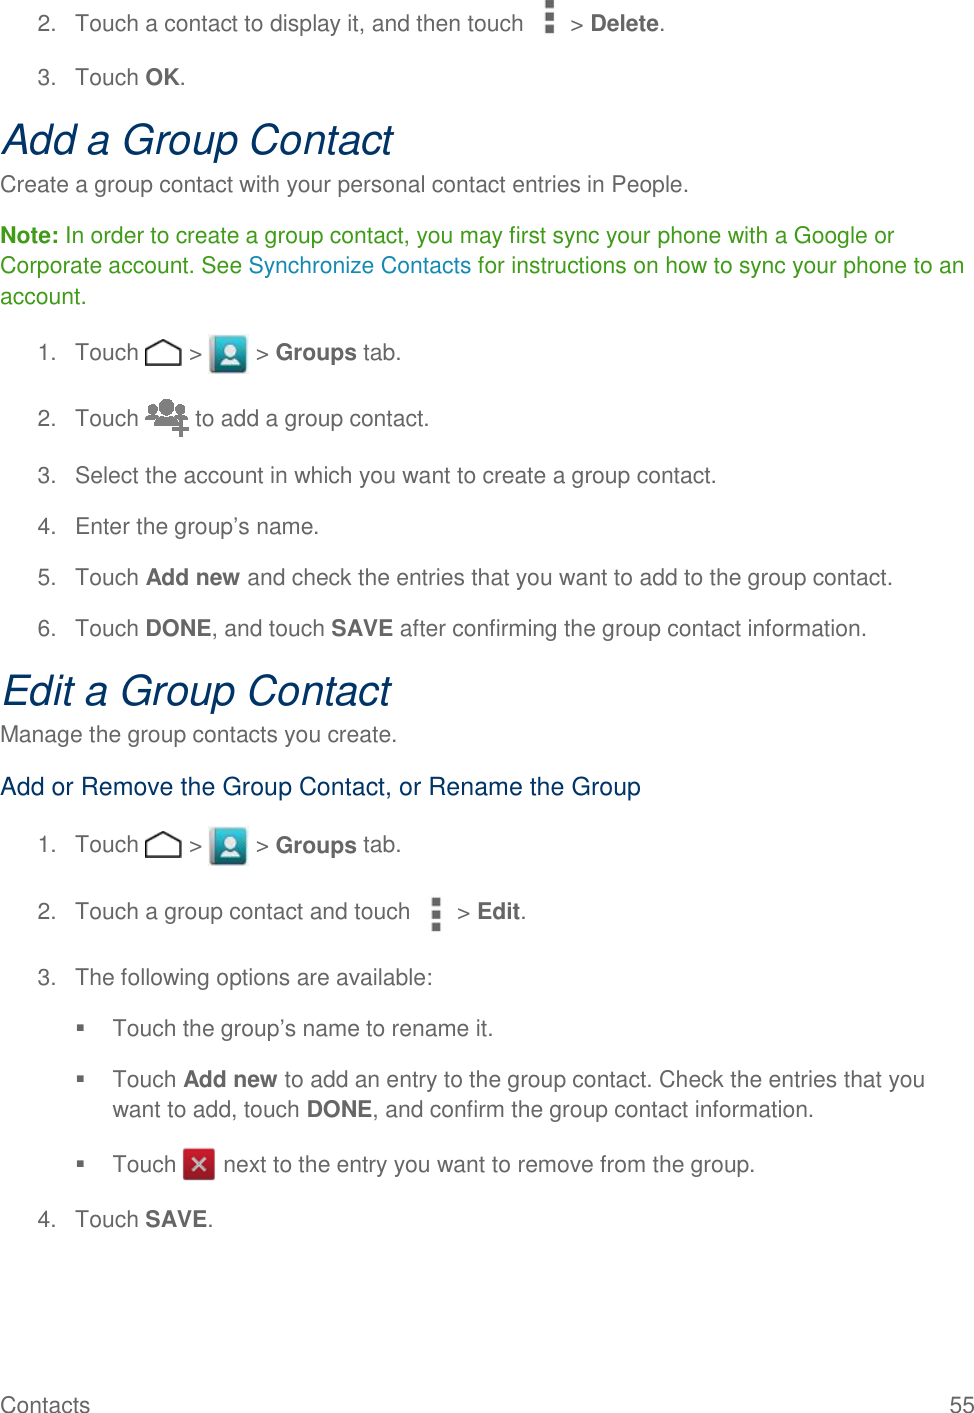 Contacts    55 2.  Touch a contact to display it, and then touch &gt; Delete. 3.  Touch OK. Add a Group Contact Create a group contact with your personal contact entries in People. Note: In order to create a group contact, you may first sync your phone with a Google or Corporate account. See Synchronize Contacts for instructions on how to sync your phone to an account. 1.  Touch   &gt;   &gt; Groups tab. 2.  Touch   to add a group contact. 3.  Select the account in which you want to create a group contact. 4.  Enter the group’s name. 5.  Touch Add new and check the entries that you want to add to the group contact. 6.  Touch DONE, and touch SAVE after confirming the group contact information. Edit a Group Contact Manage the group contacts you create. Add or Remove the Group Contact, or Rename the Group 1.  Touch   &gt;   &gt; Groups tab. 2.  Touch a group contact and touch &gt; Edit. 3.  The following options are available:   Touch the group’s name to rename it.   Touch Add new to add an entry to the group contact. Check the entries that you want to add, touch DONE, and confirm the group contact information.   Touch   next to the entry you want to remove from the group. 4.  Touch SAVE. 